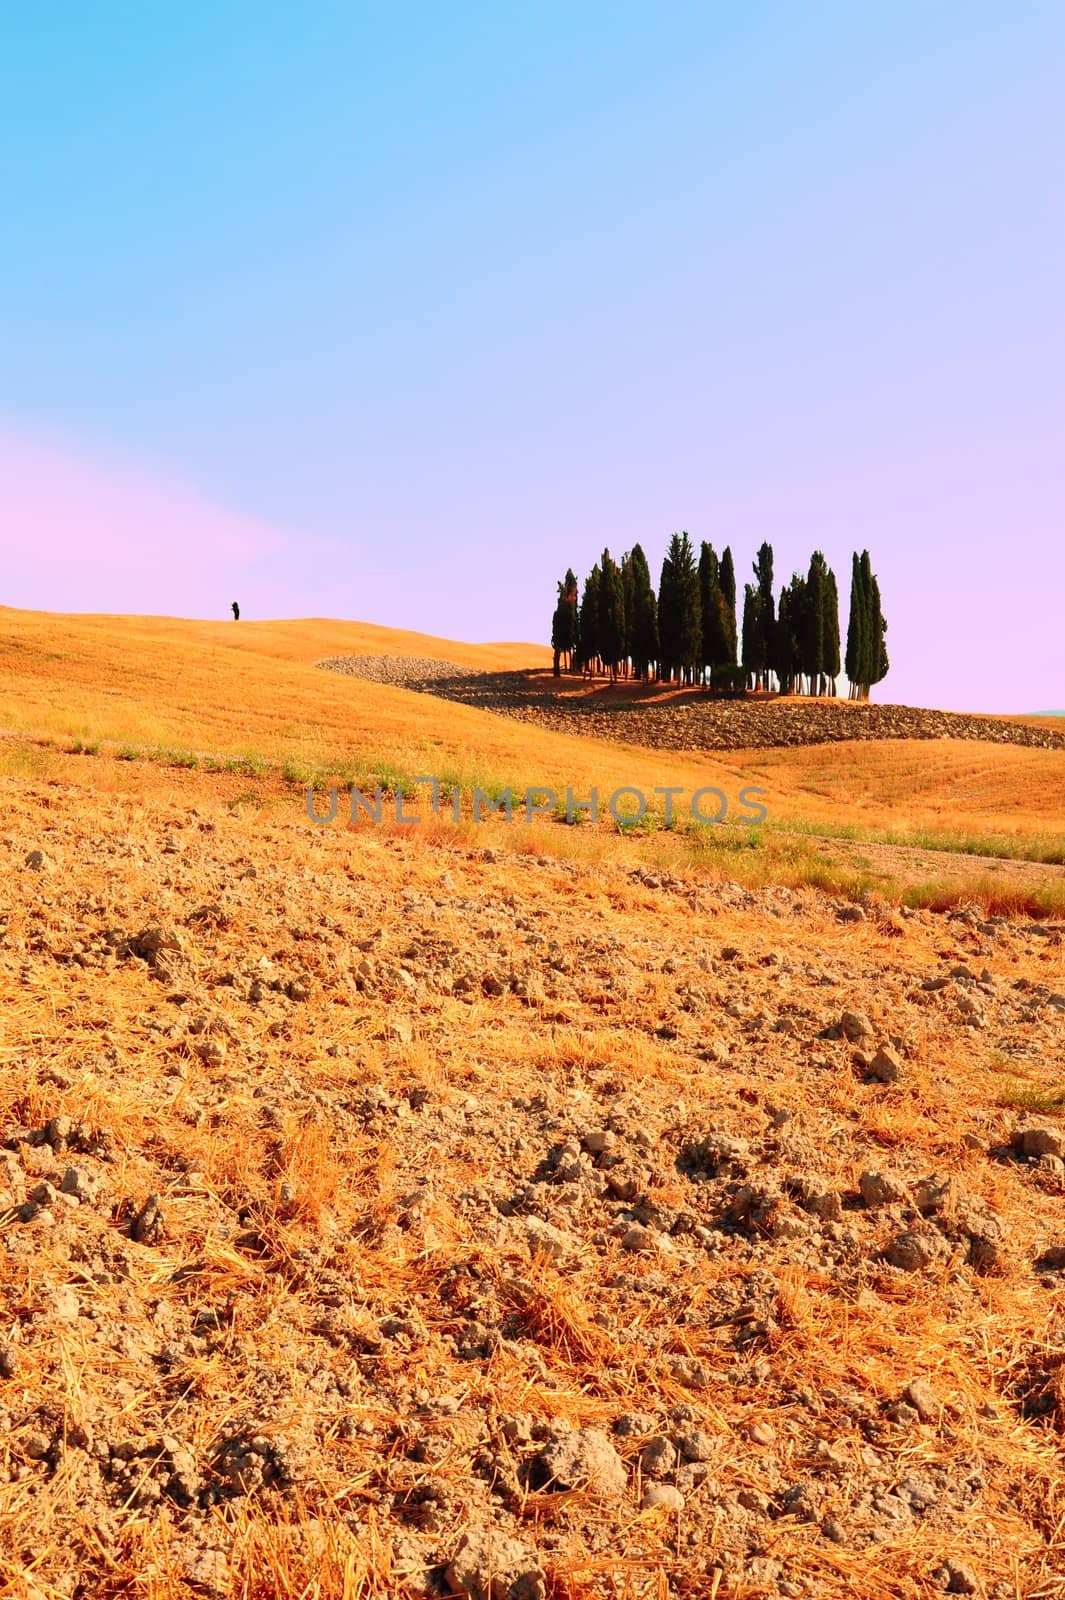 Tuscany Landscape With Many Ornamental Cypress In The Morning